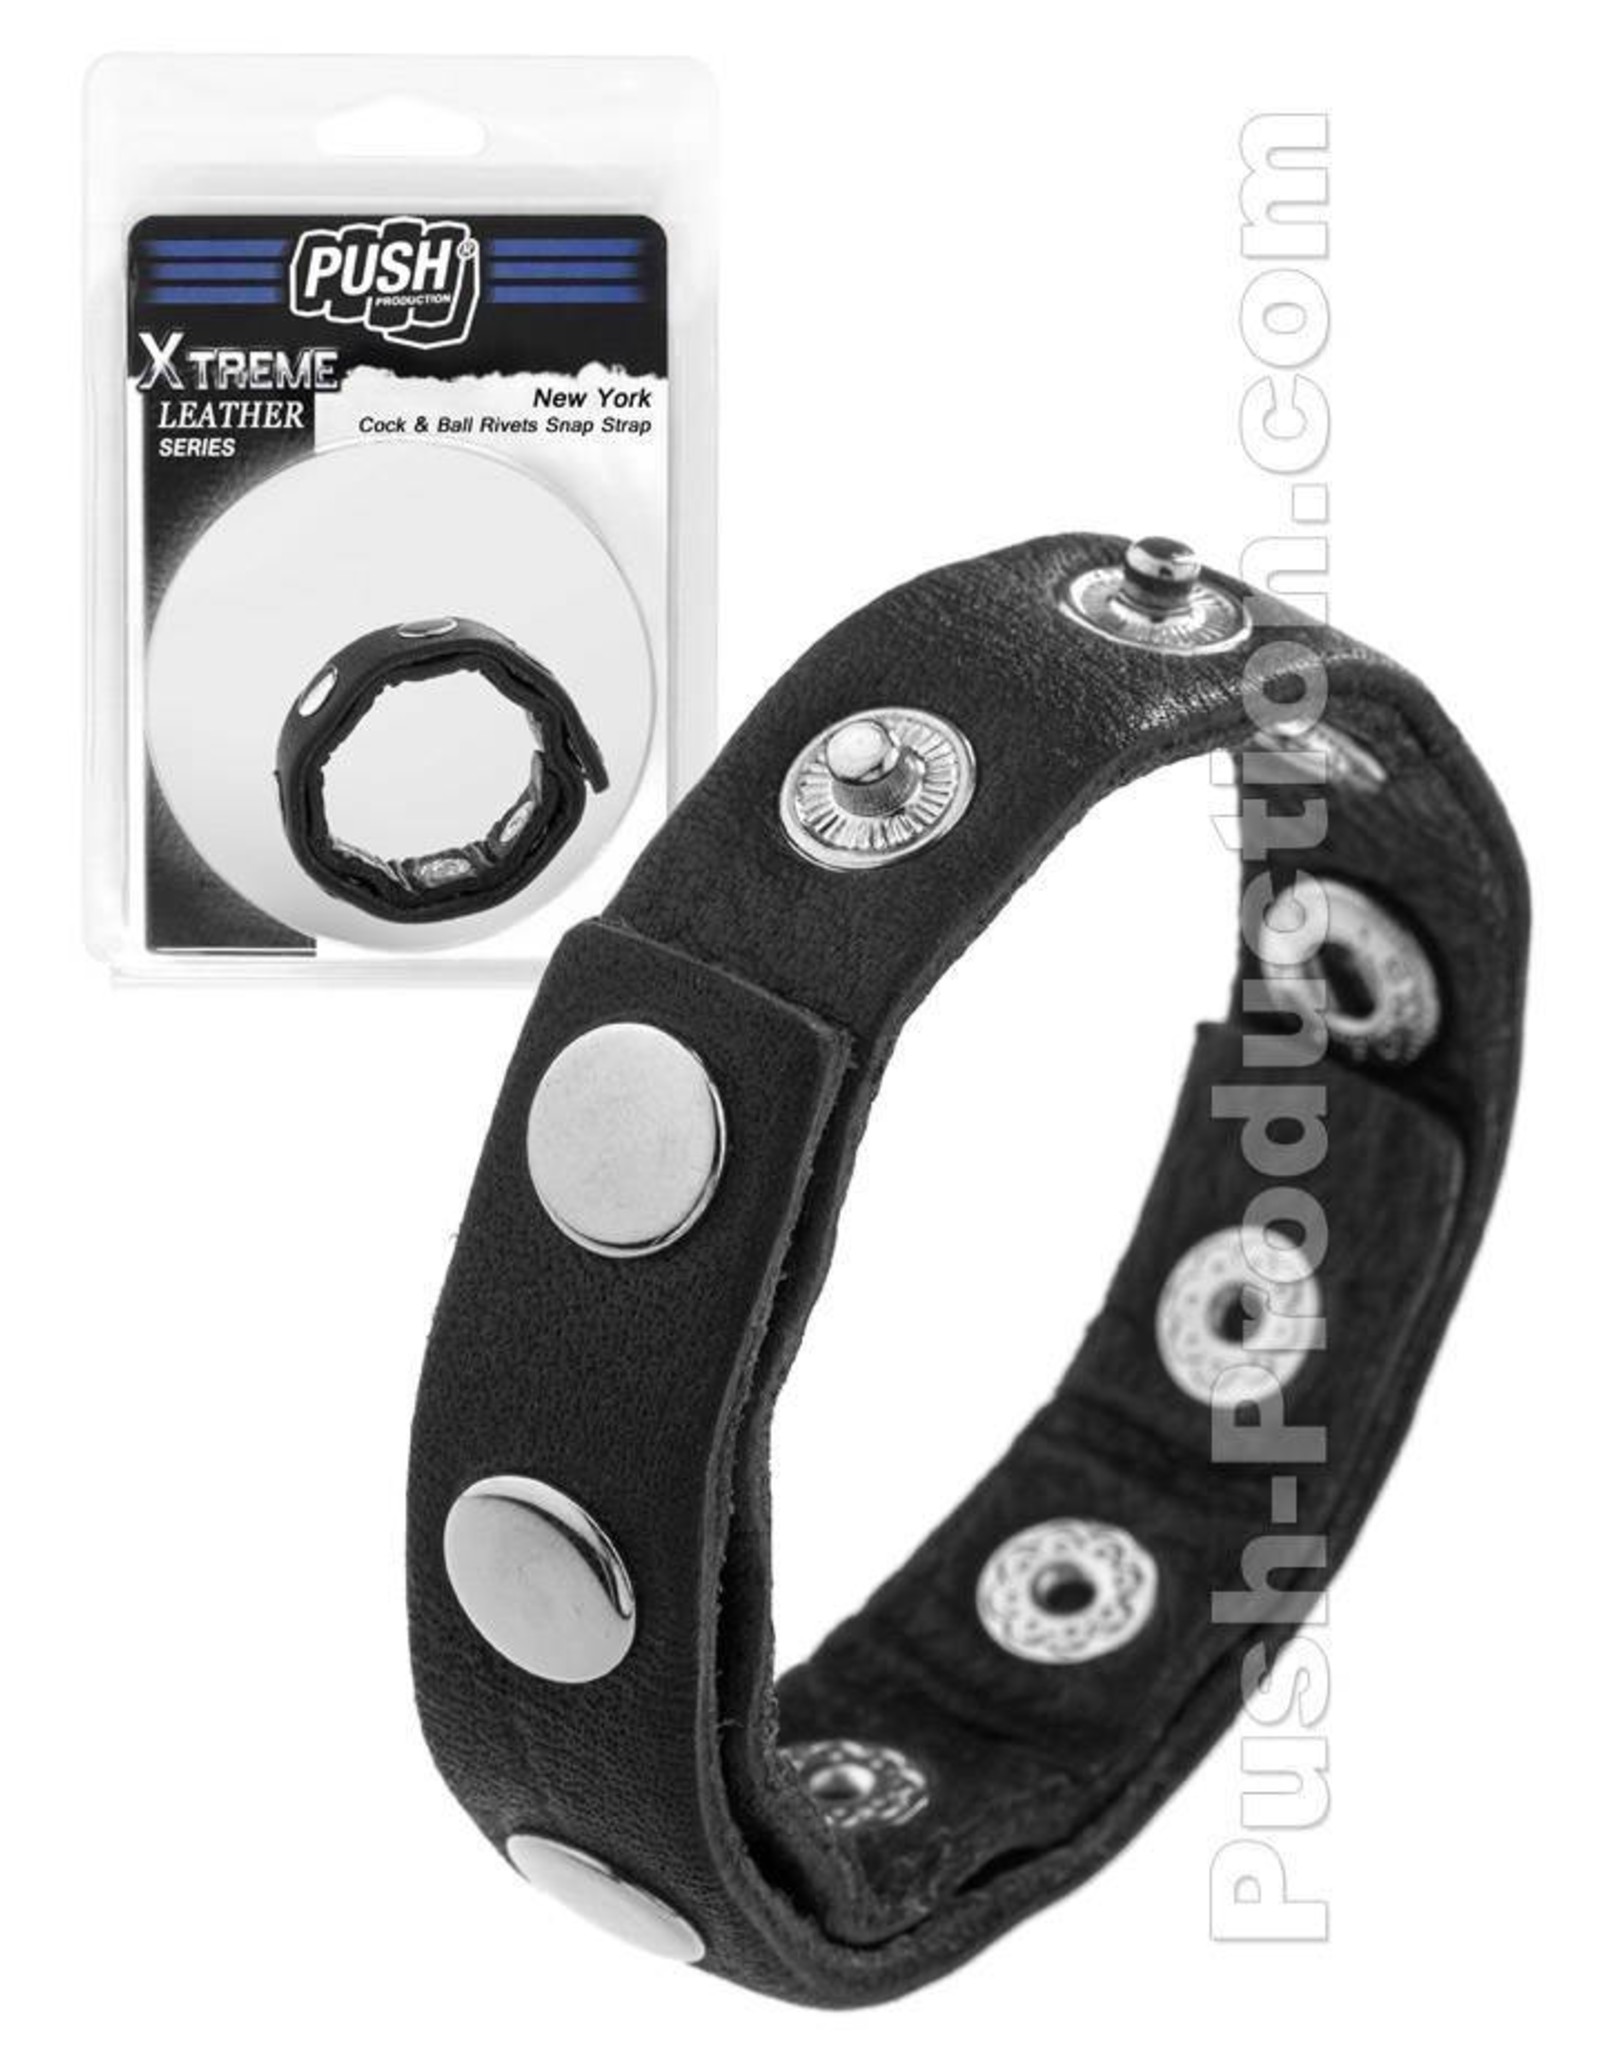 Push Xtreme Leather New York Cock & Ball Rivets Snap Strap